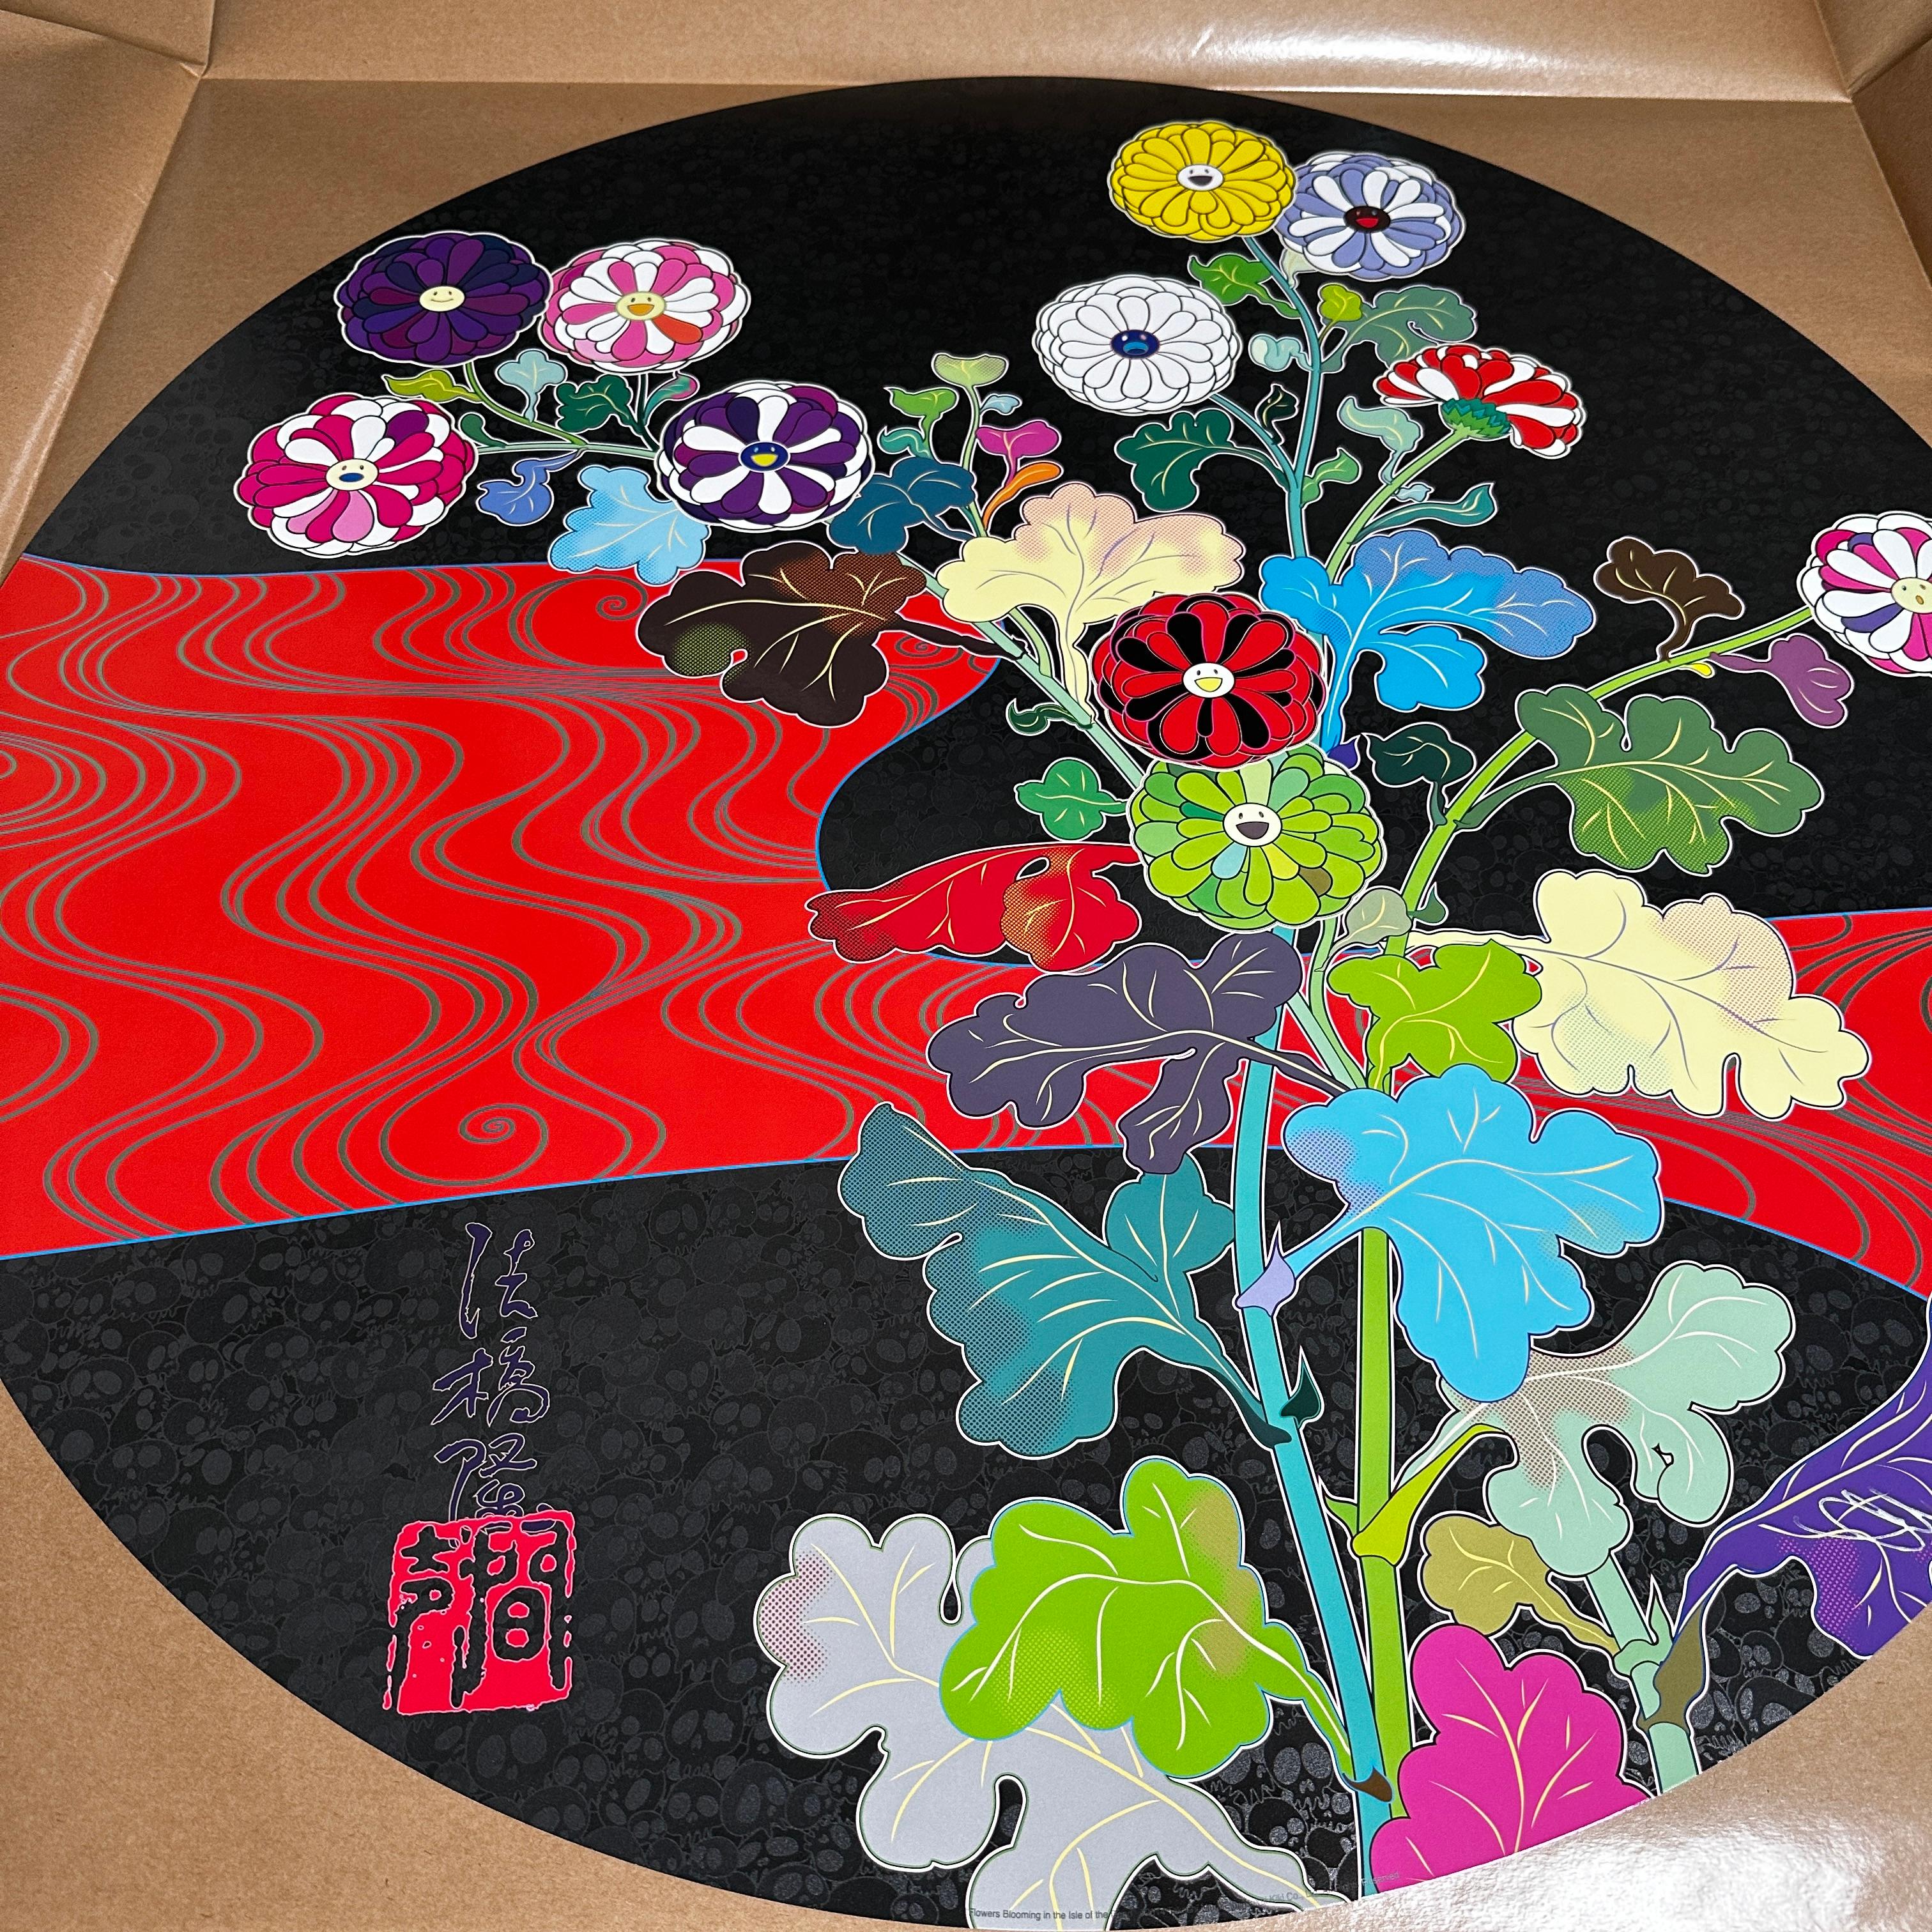 Artist: Takashi Murakami
Title: Flowers Blooming in the Isle of the Dead
Year: 2022
Edition: 300
Size: 710mm / 27.45